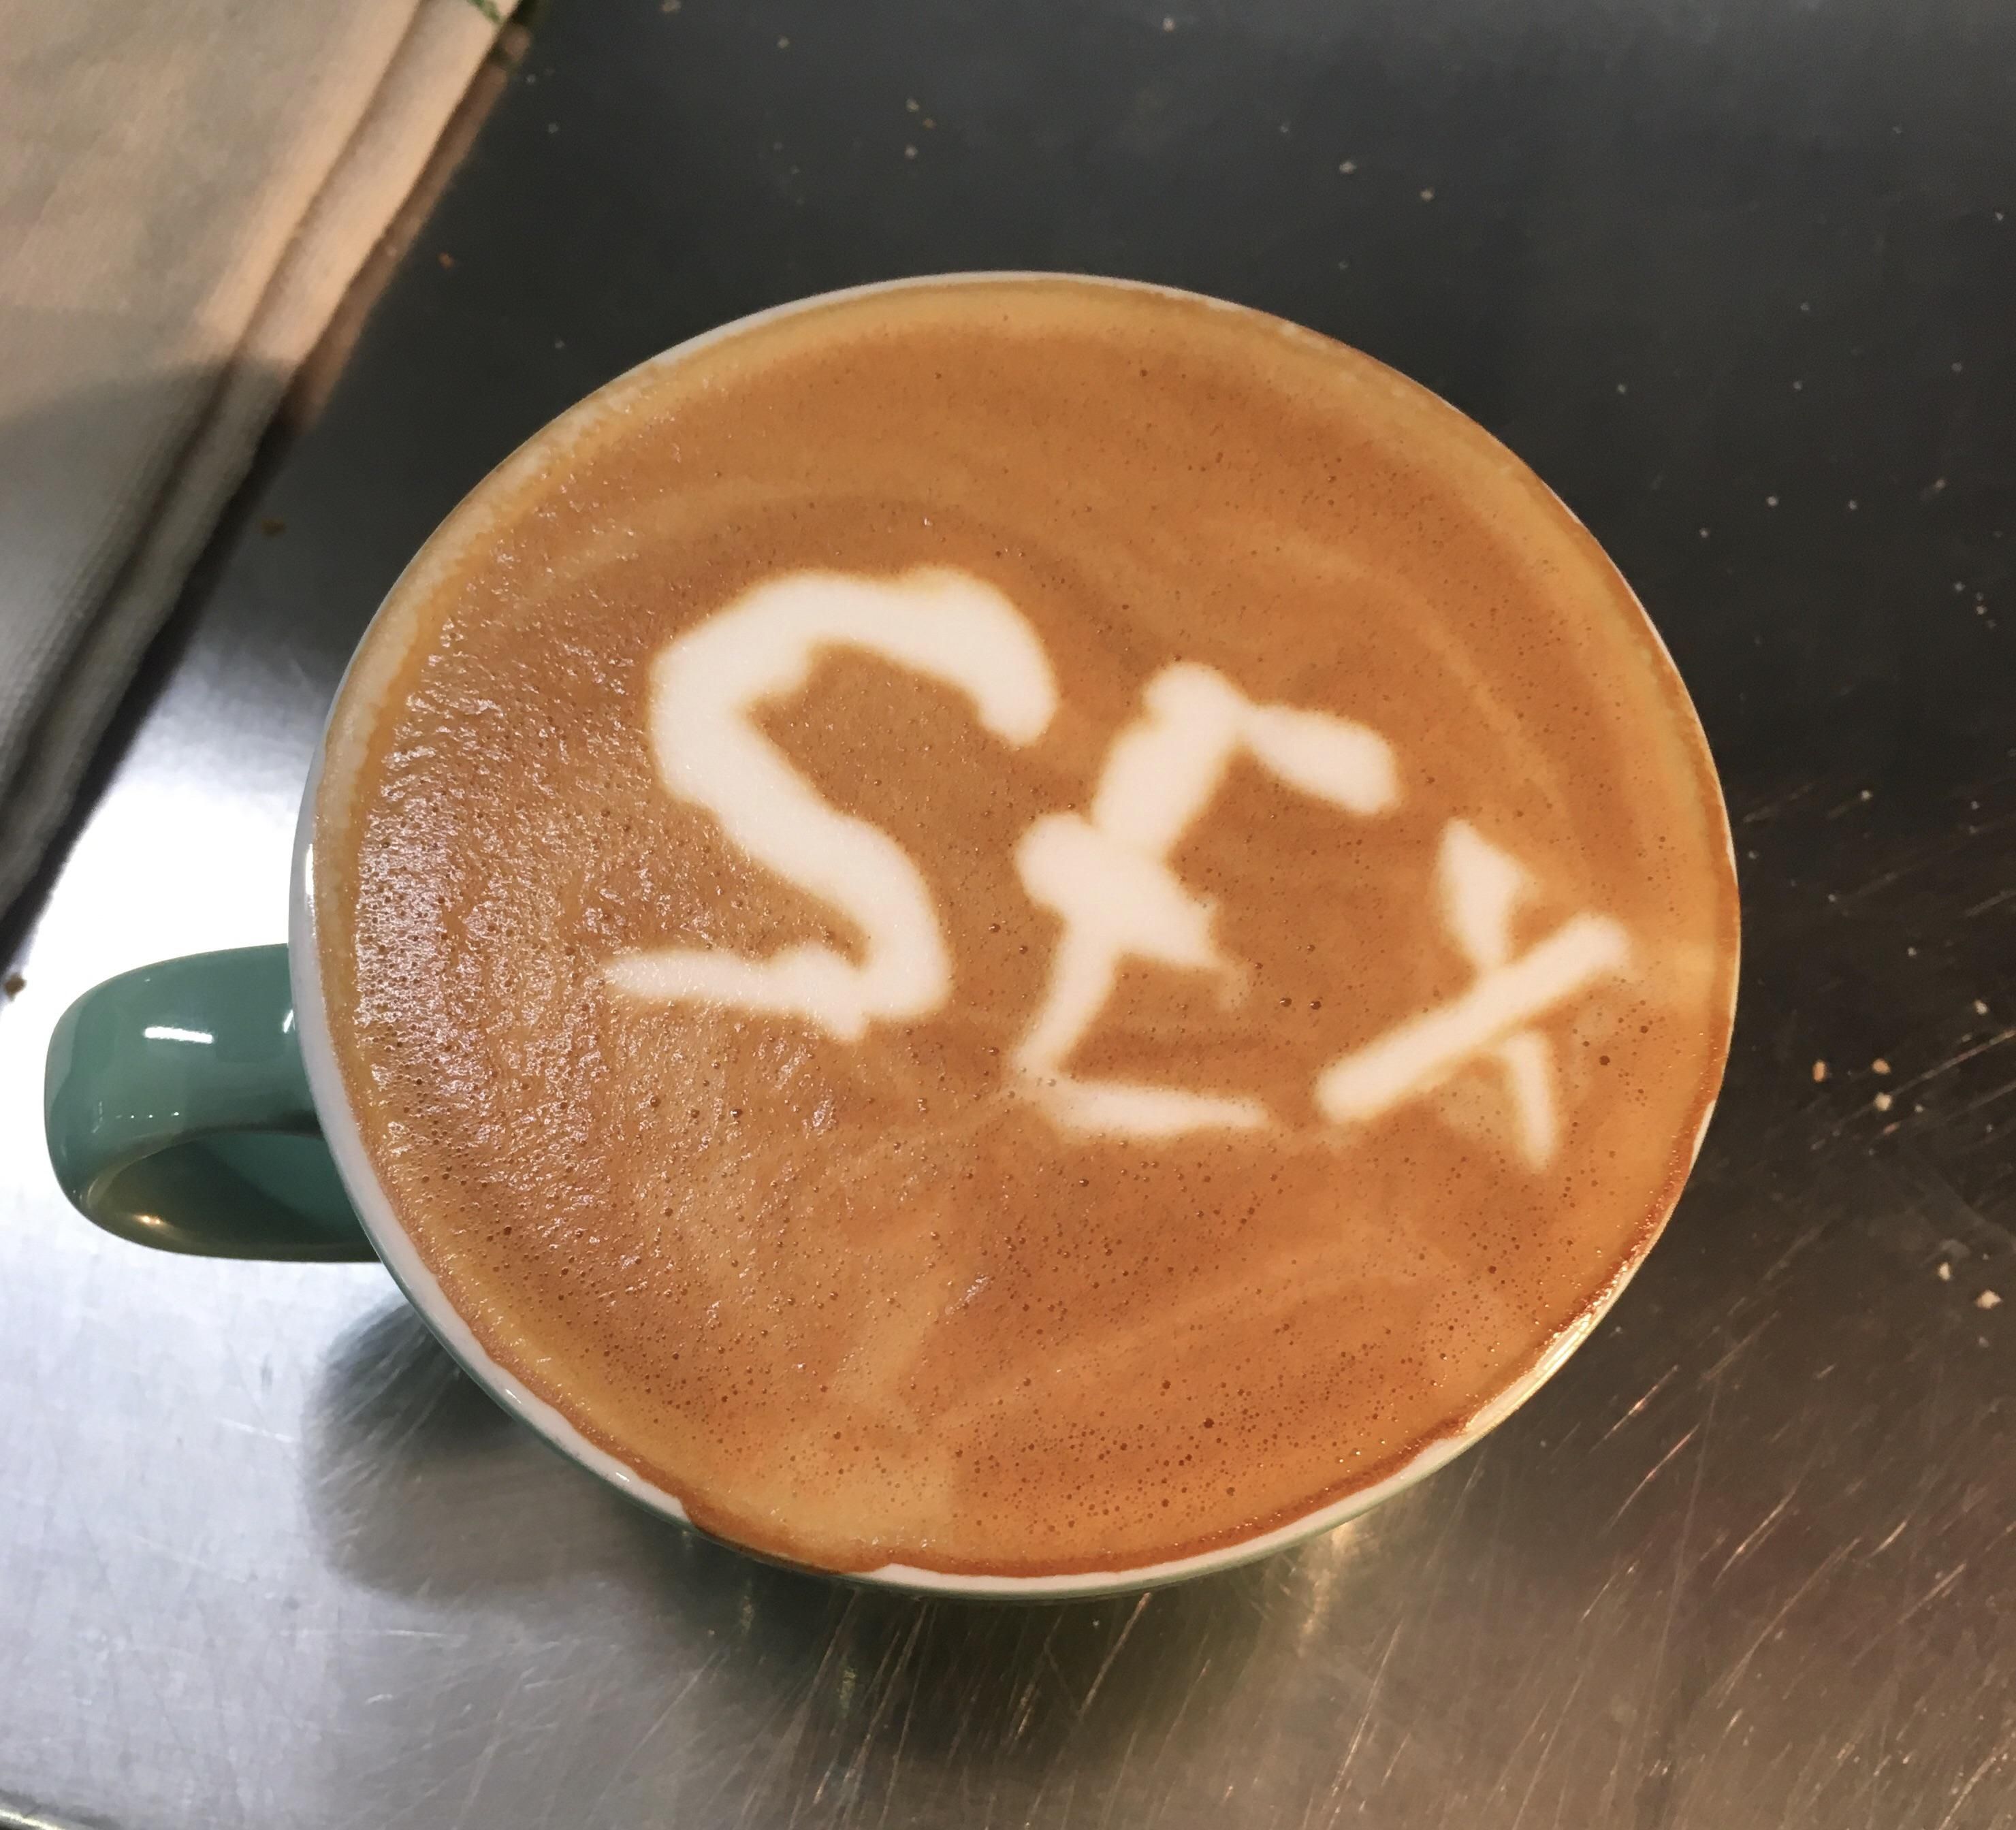 This barista is really confident in their coffee making ability